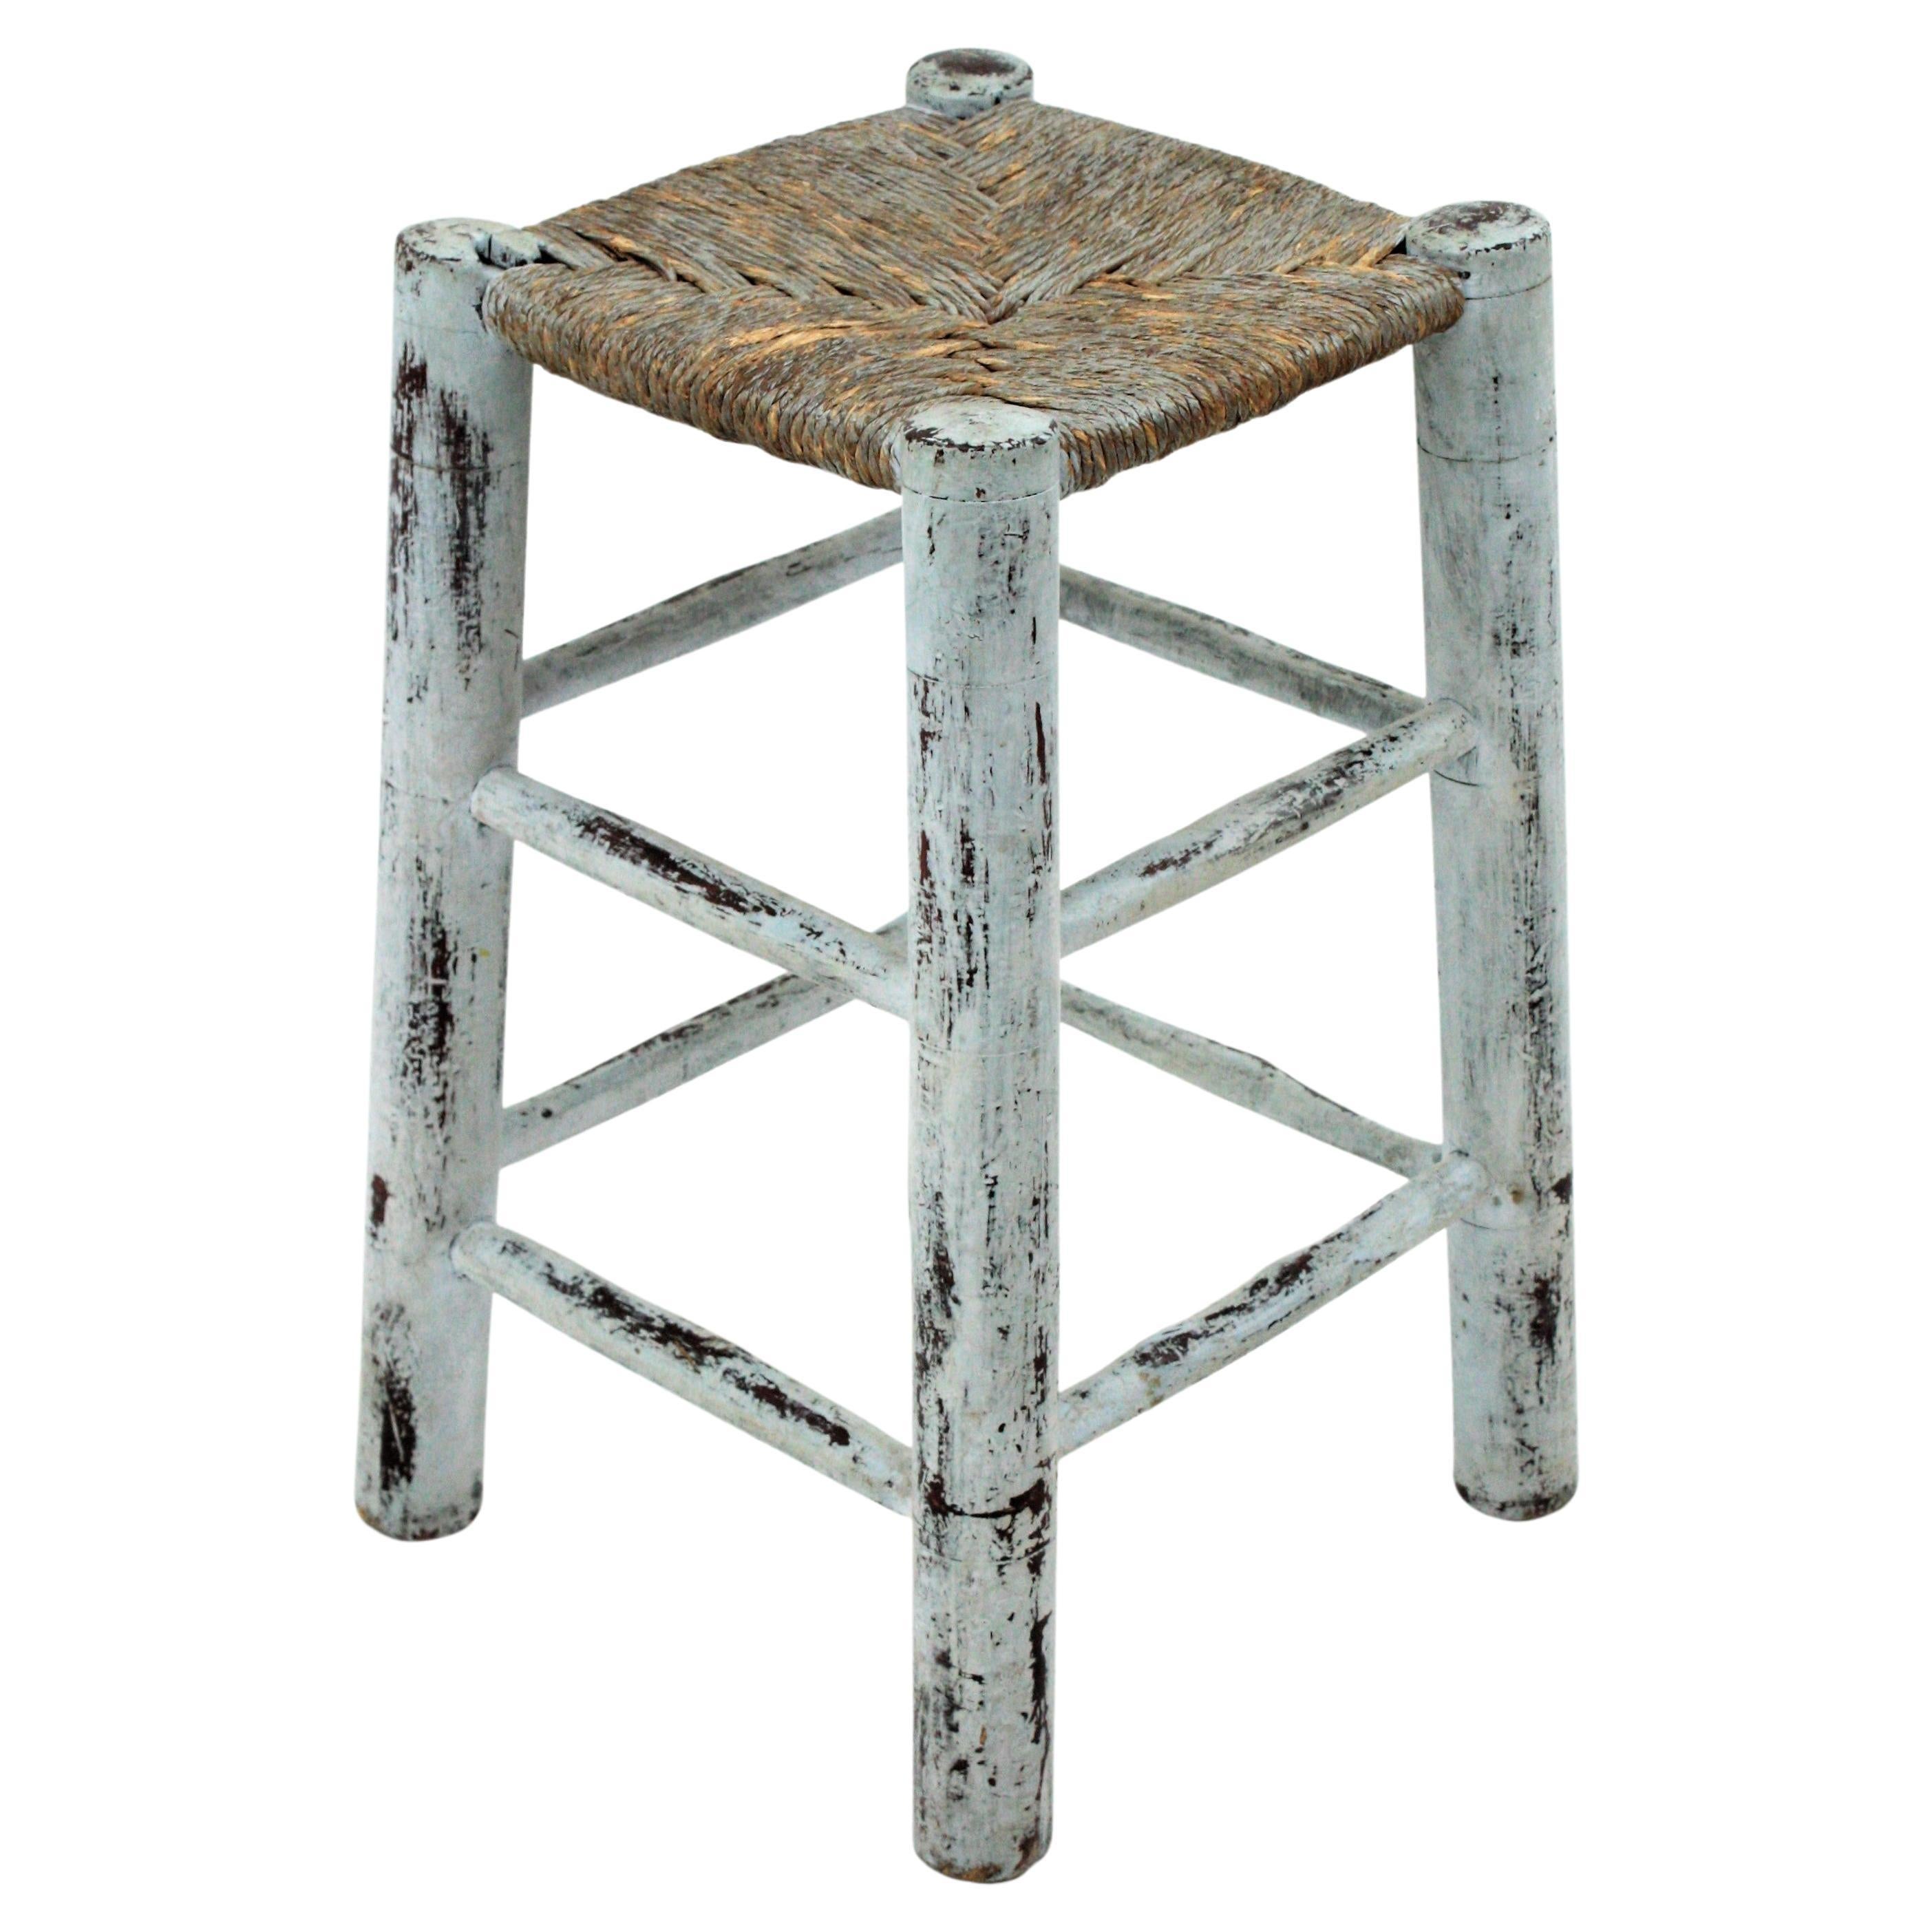 Coastal Wooden stool with rope seat and blue patina finish. France, 1940s-1950s.
This rustic stool has a wooden structure with turned legs and an aged patina in soft blue. The seat is made with hand braided rope grass rope that has been carefully